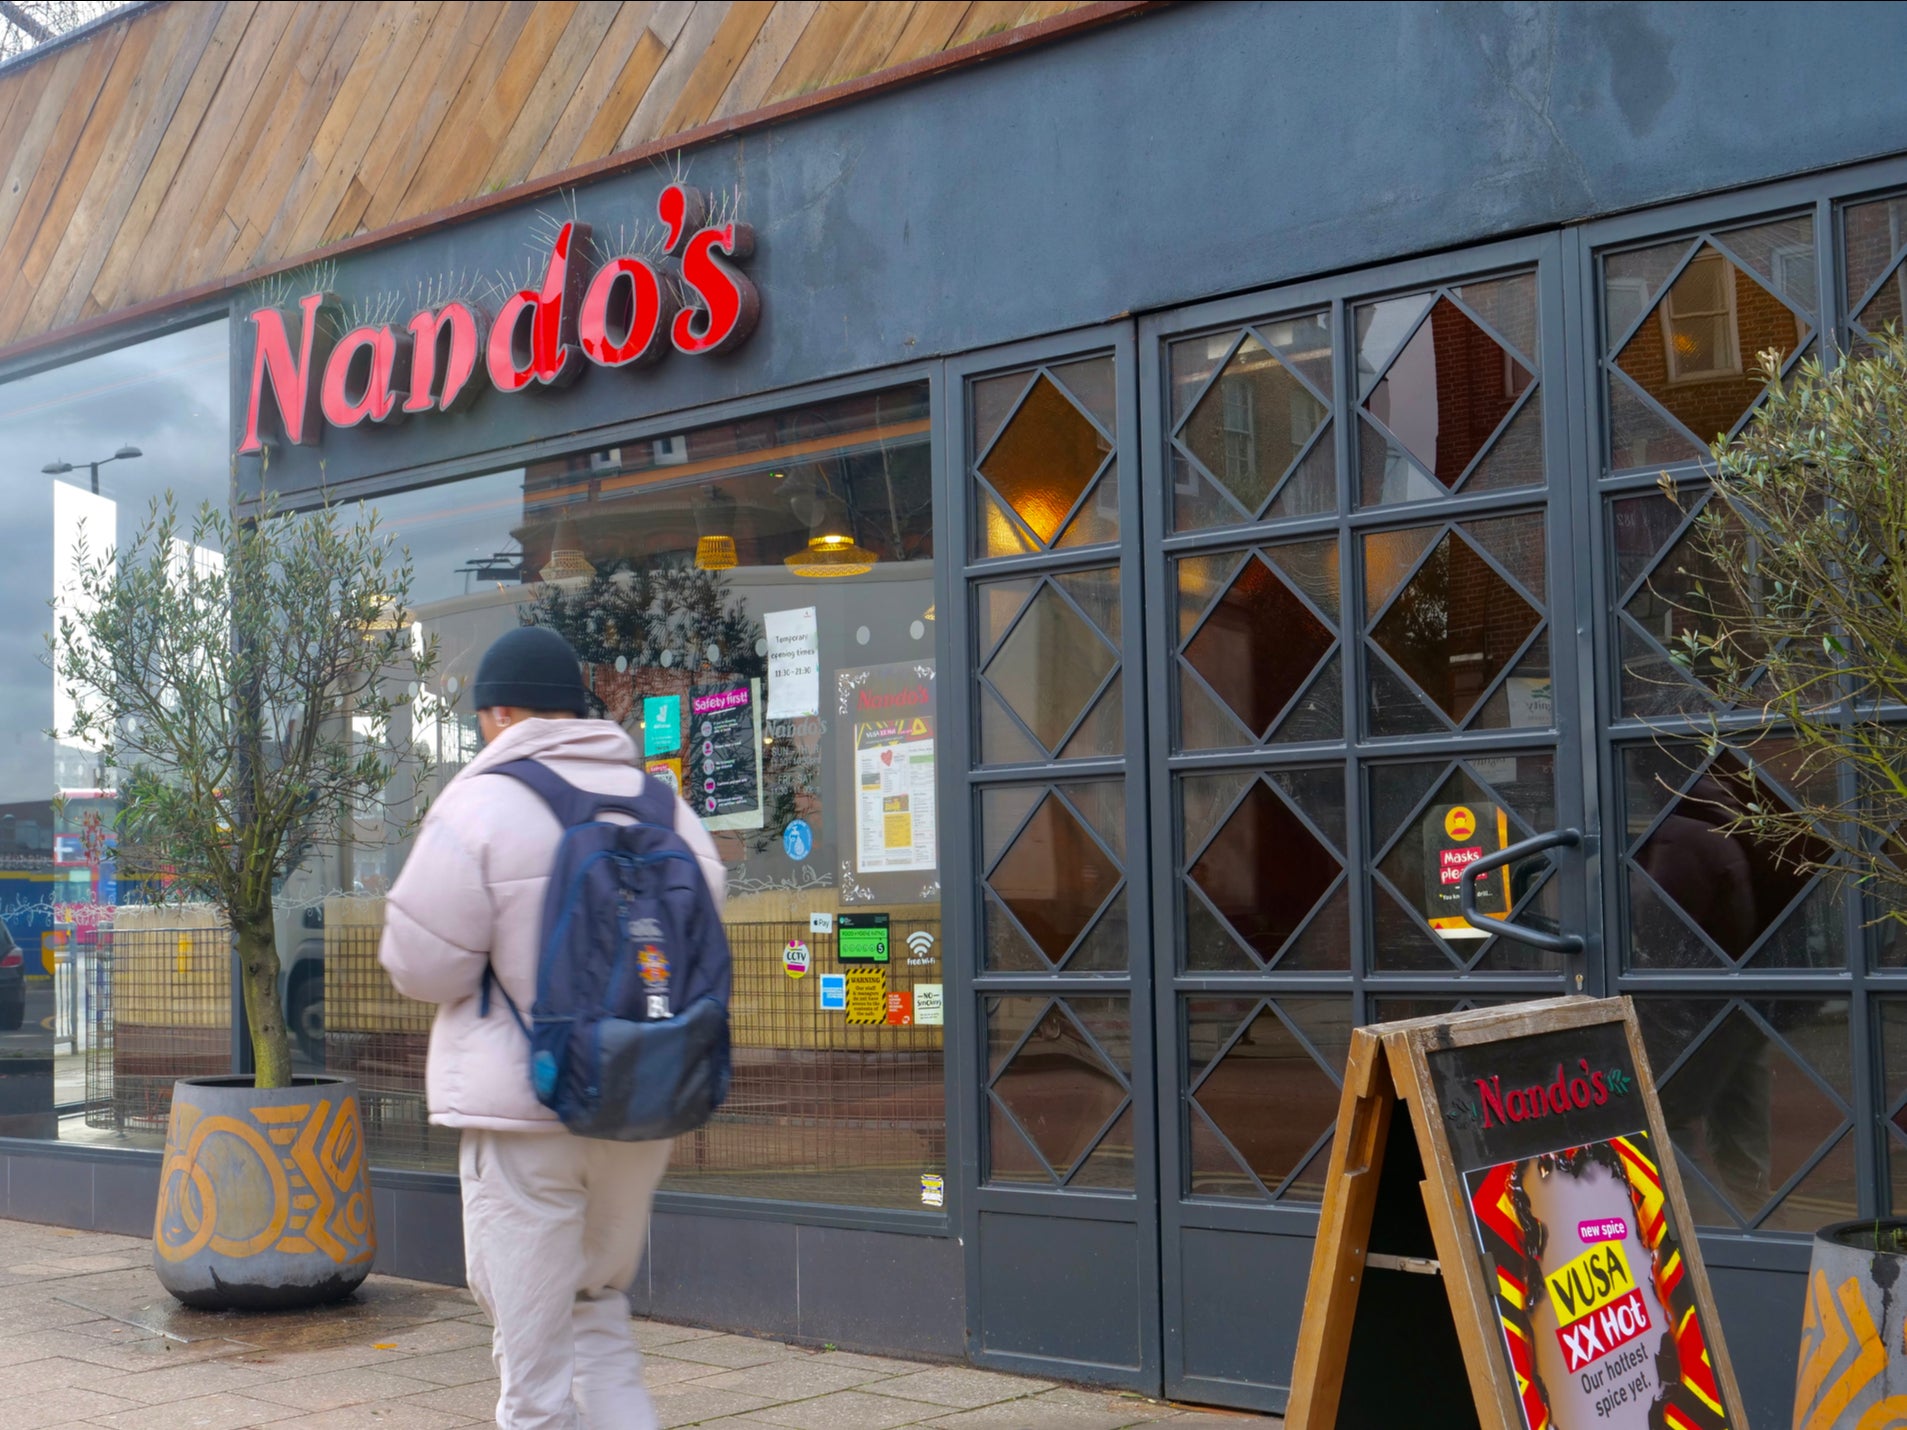 Nando’s has been hit by supply chain issues, forcing it to close some of its restaurants in England, Wales and Scotland